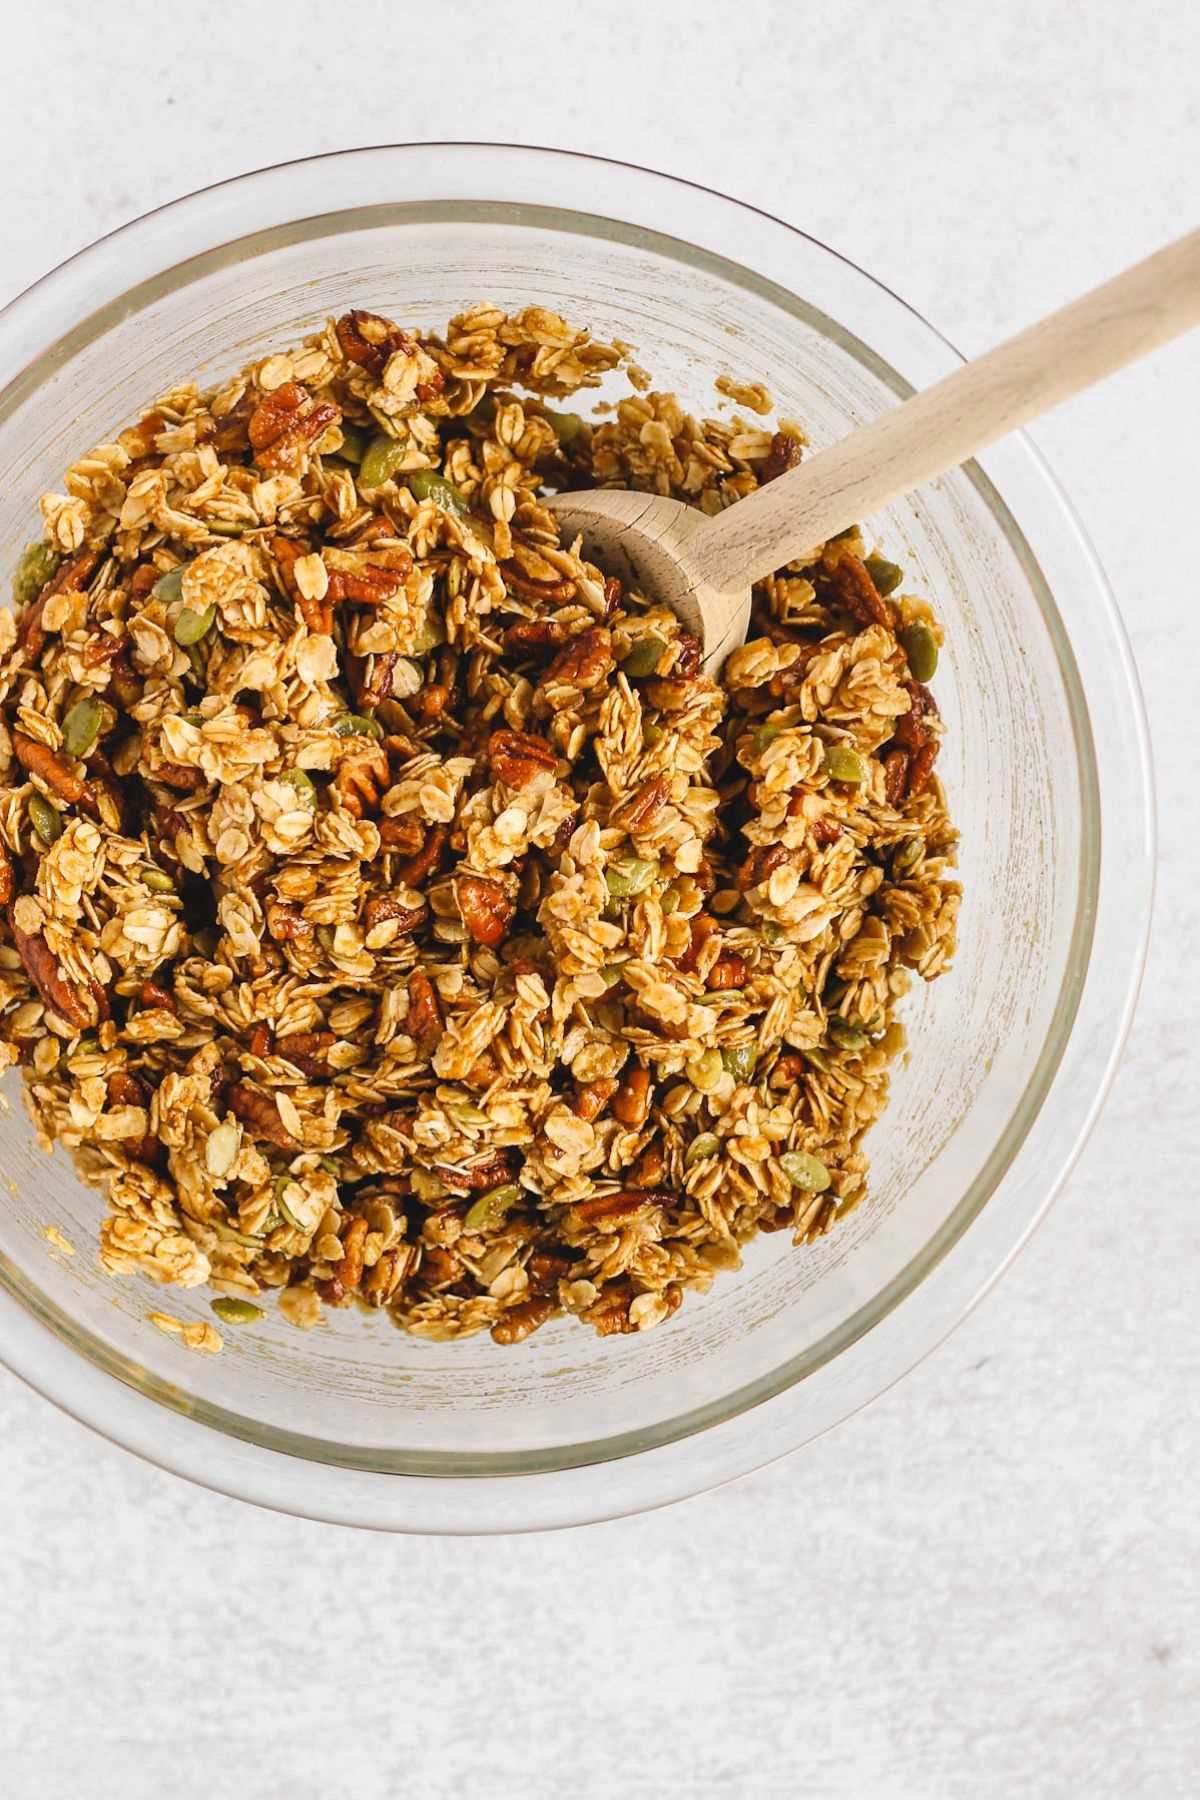 Pumpkin granola ingredients mixed together in a glass mixing bowl with a wooden spoon.